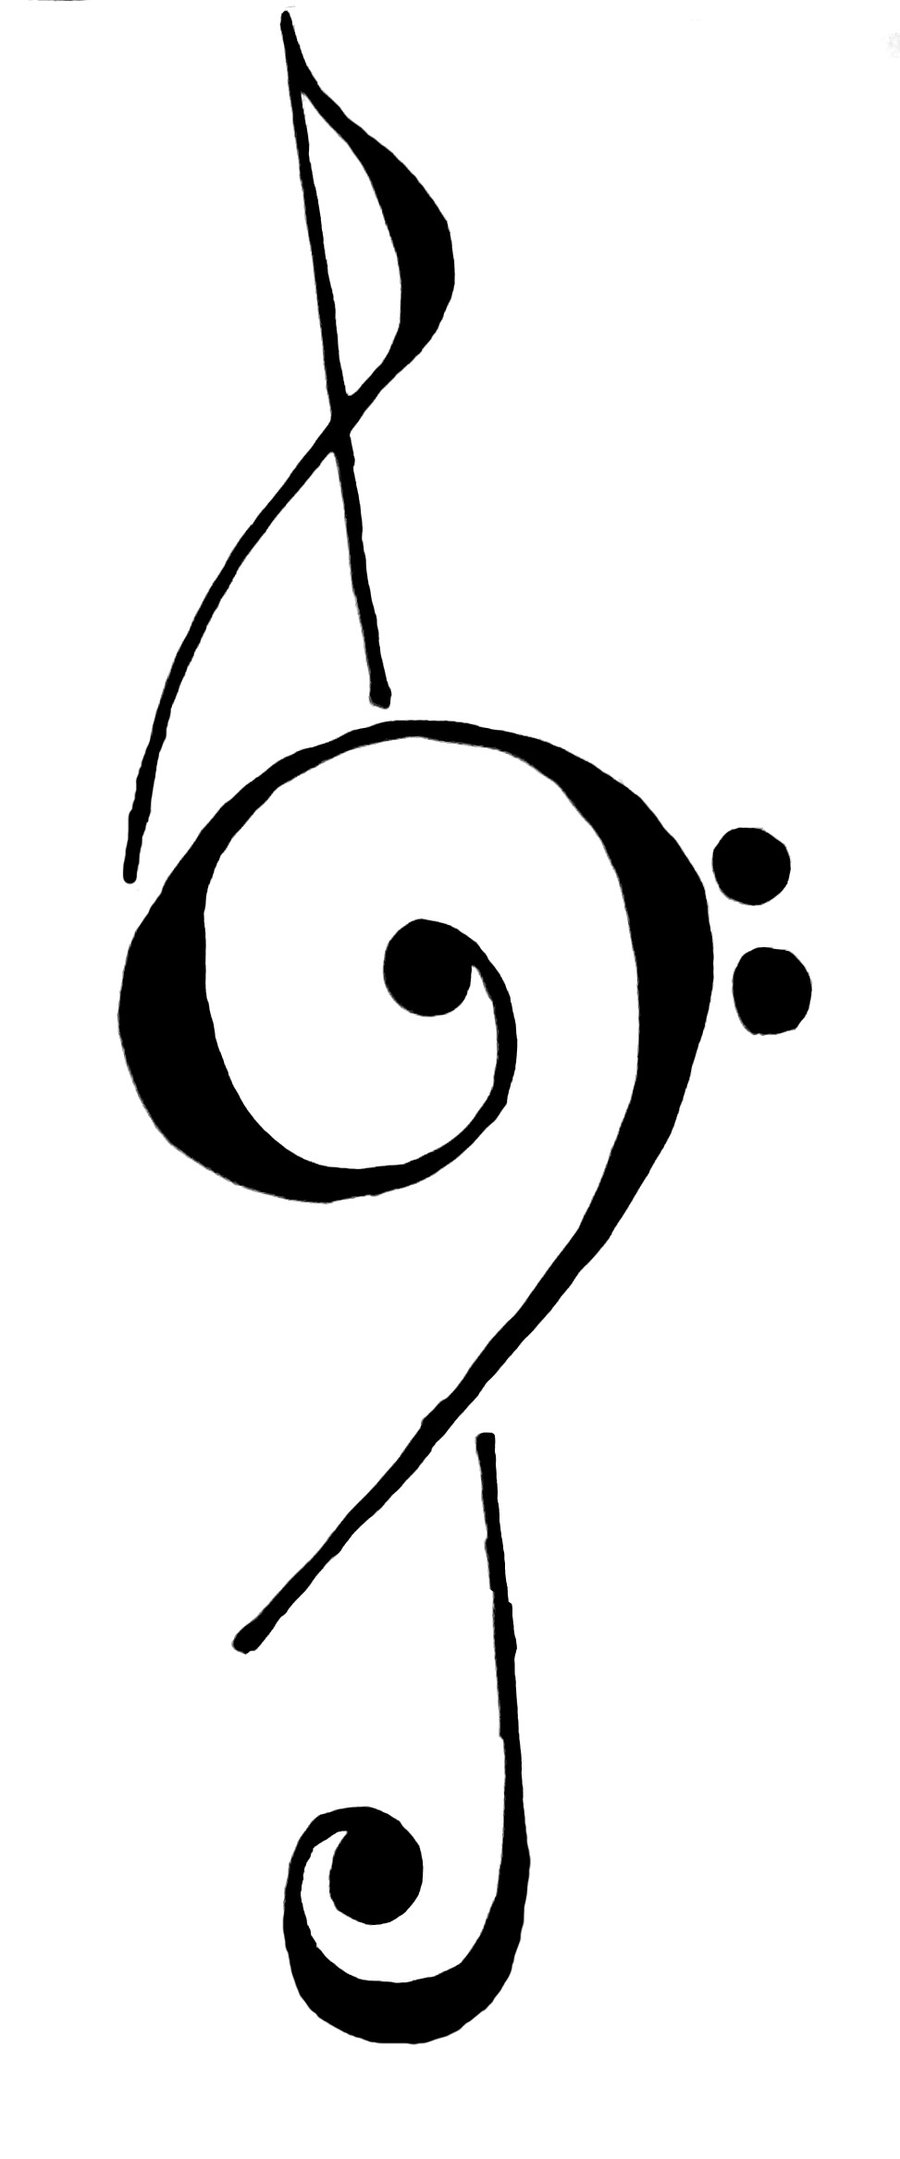 1000+ images about Treble & Bass Clef